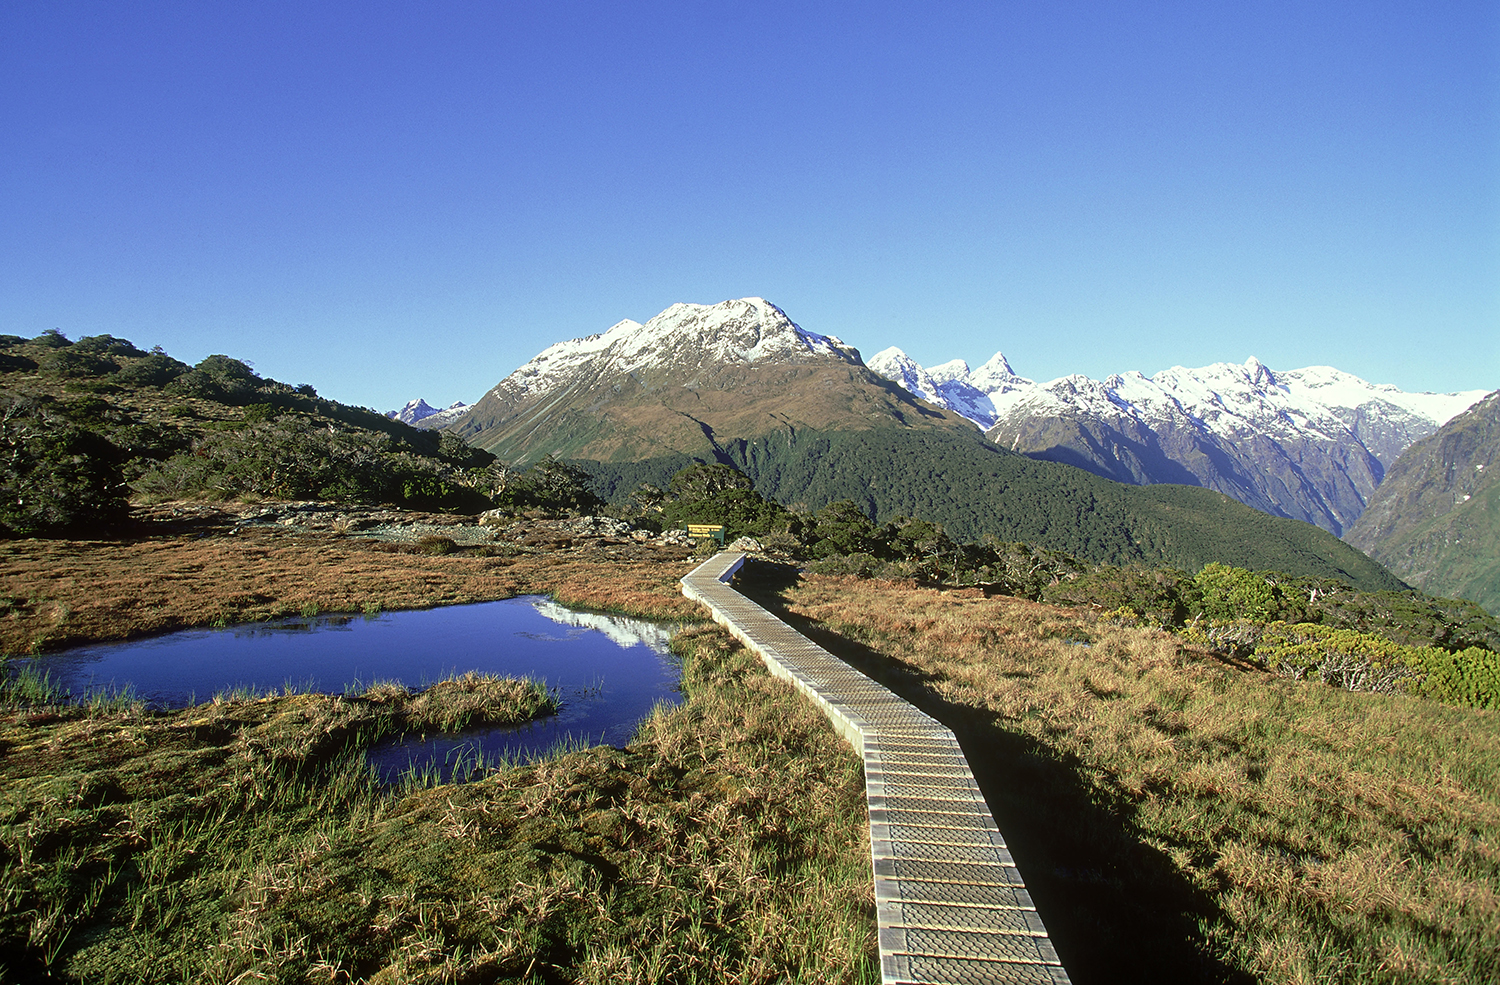 Blaze a trail past the snow-sprinkled mountains and yawning valleys of Fiordland National Park on New Zealand's Routeburn Track. Image by Grahame McConnell / Photolibrary / Getty Images